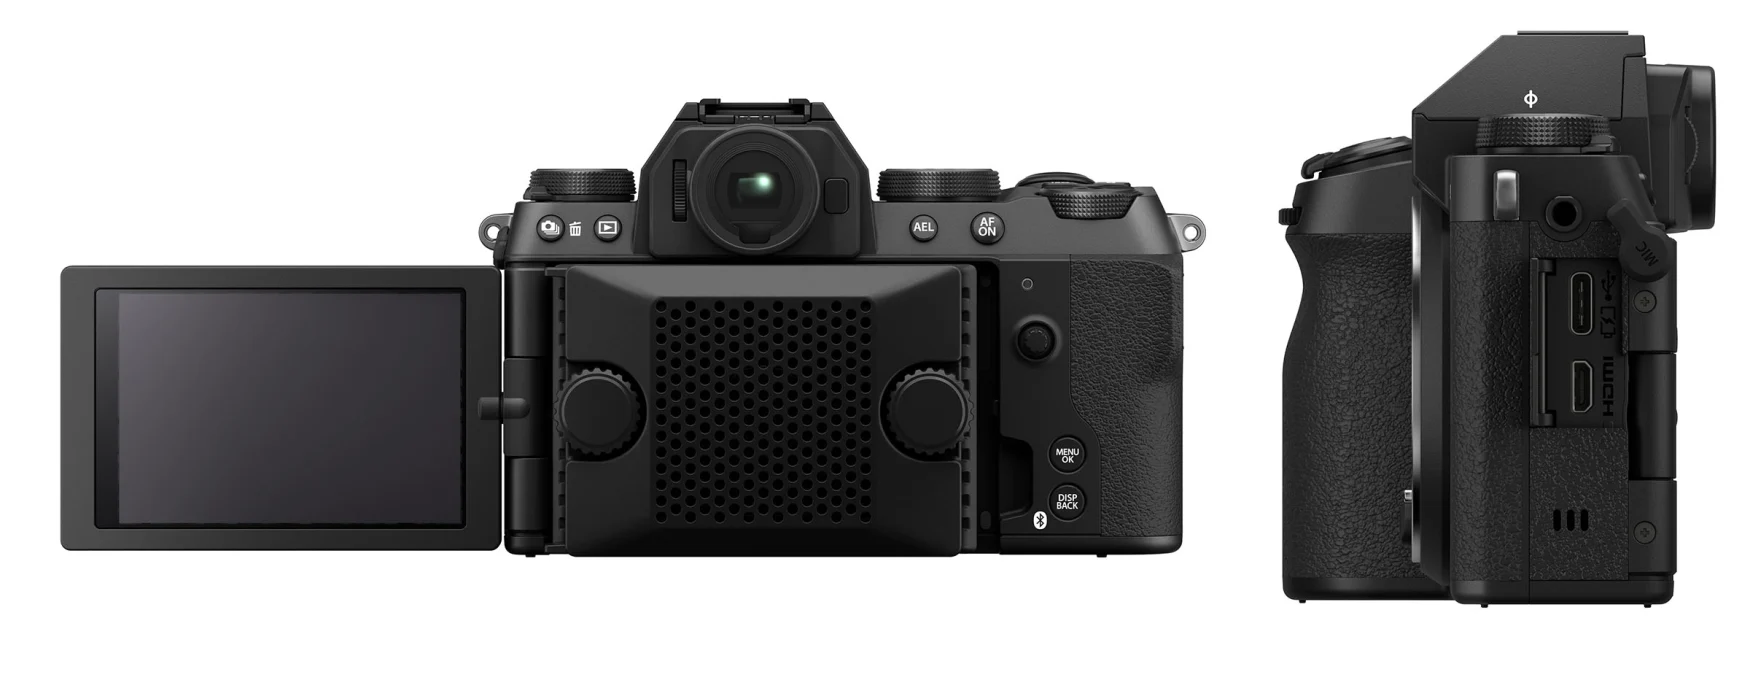 Fujifilm's X-S20 goes hard on content creation with 6.2K video and a vlog-specific dial